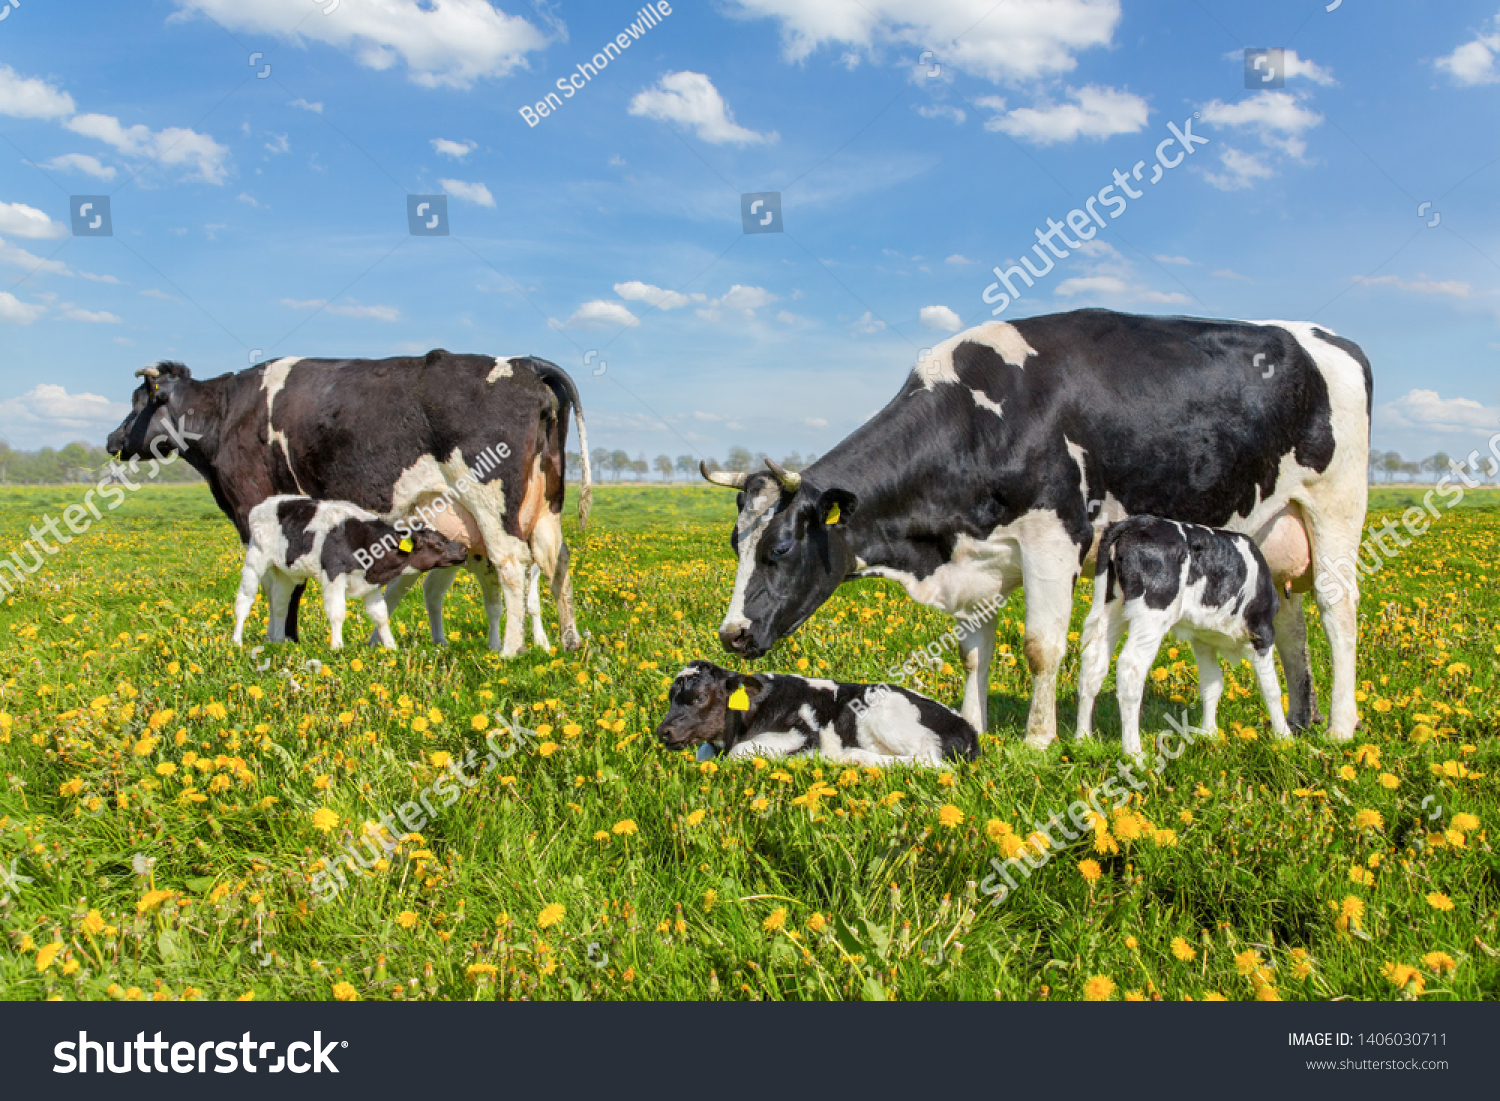 Two mother cows with drinking calves in european pasture #1406030711